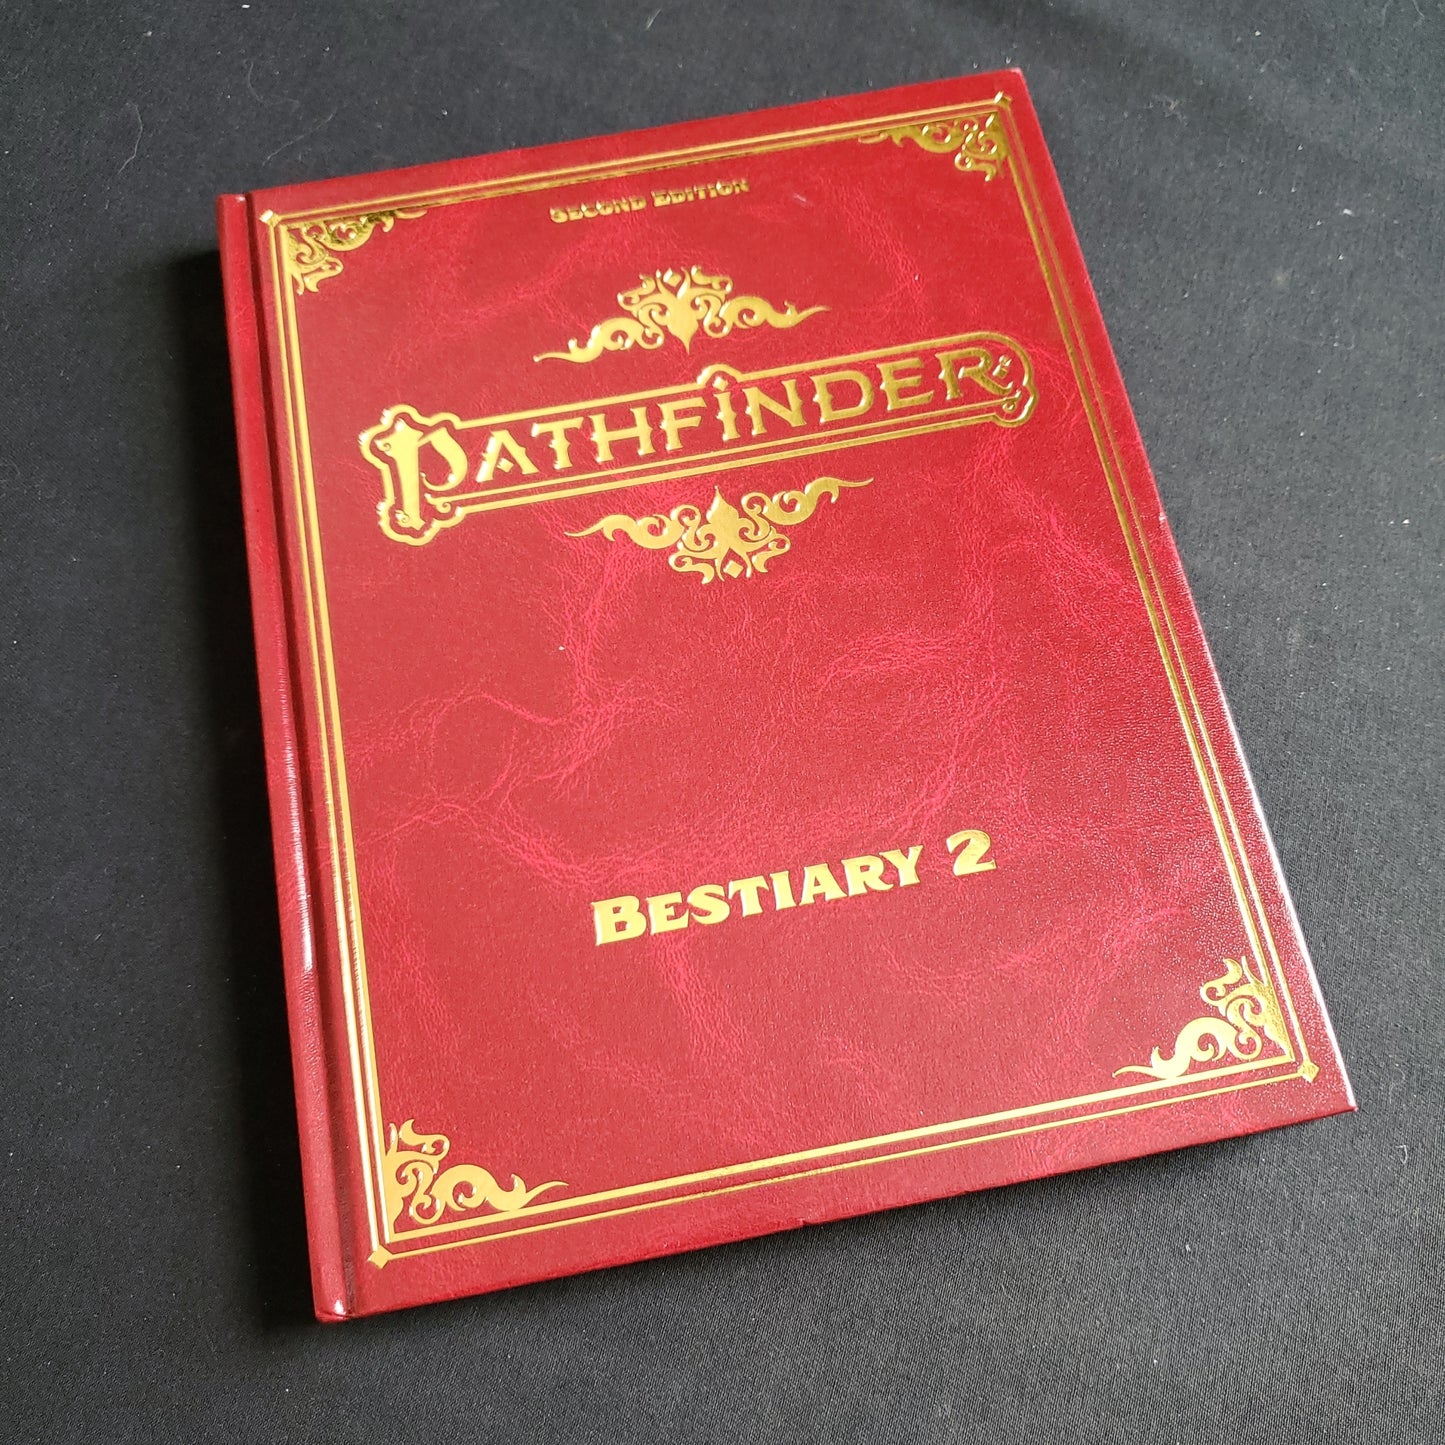 Image shows the front cover of the special edition Bestiary 2 book for the Pathfinder Second Edition roleplaying game